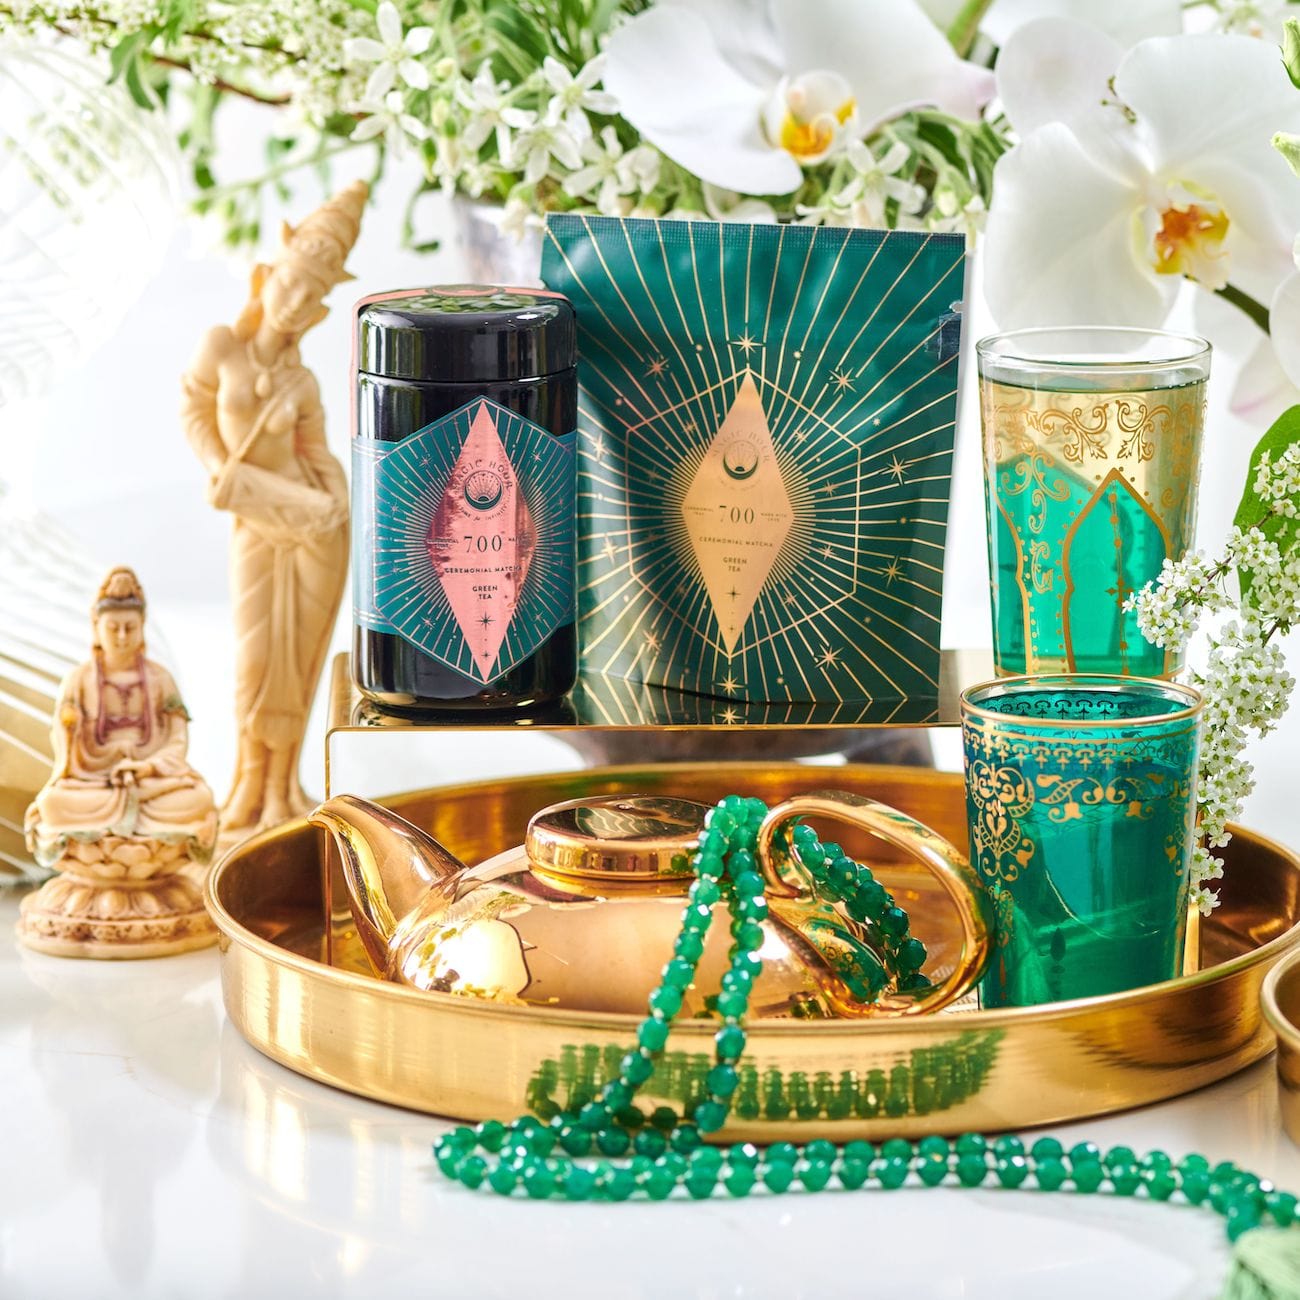 A golden tray displays an assortment of ornate items, including a green and gold teacup, a green beaded necklace, a gold teapot with Organic Ceremonial Matcha 700 from Club Magic Hour, and a jar with a teal and pink label. Floral arrangements with white flowers and statues are in the background.